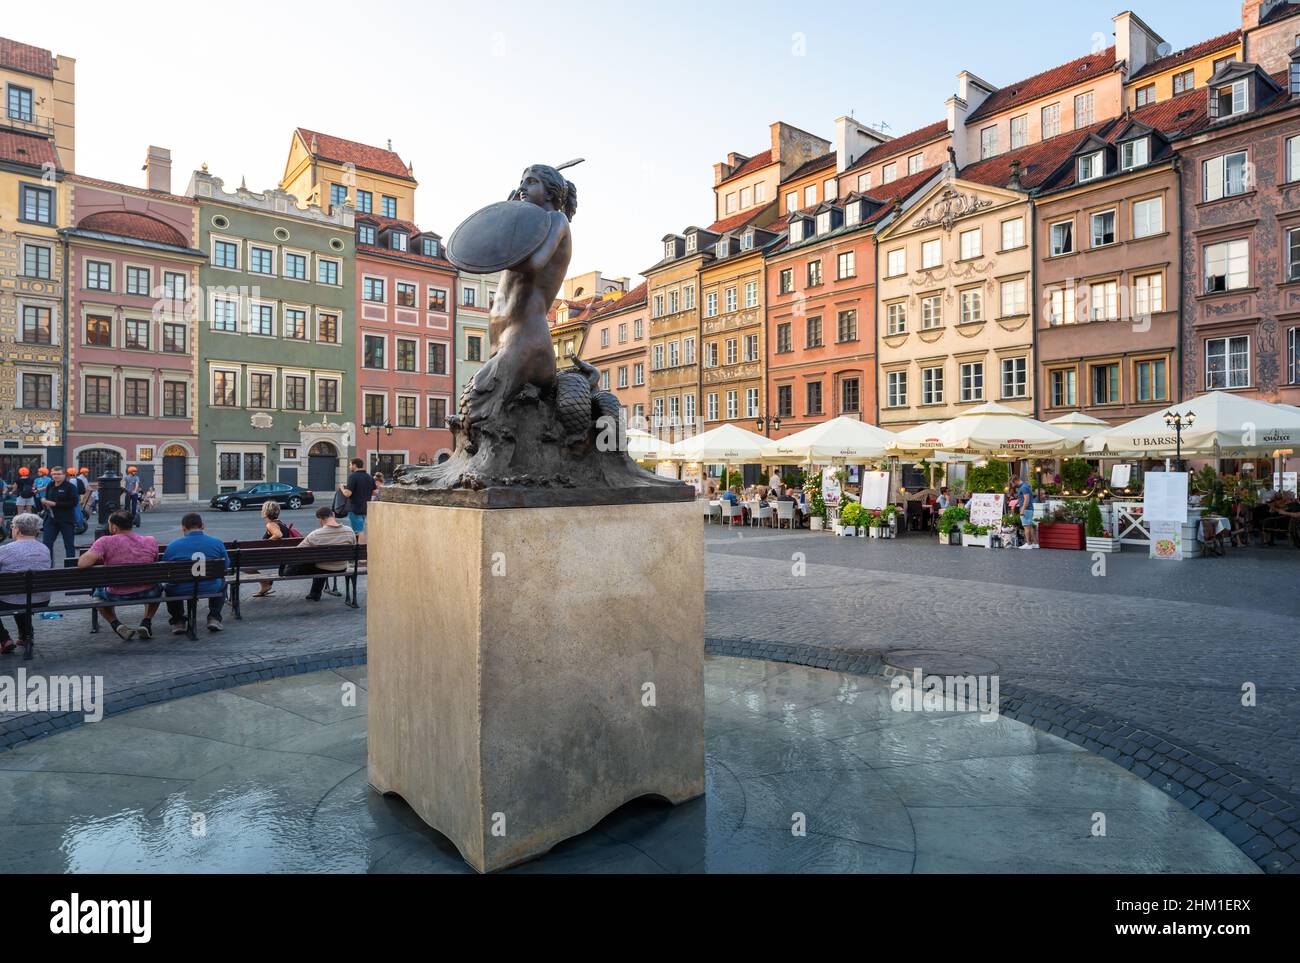 Old Town Market Place and Mermaid of Warsaw Sculpture (Syrenka) originally designed by Konstanty Hegel in 1855 - Warsaw, Poland Stock Photo